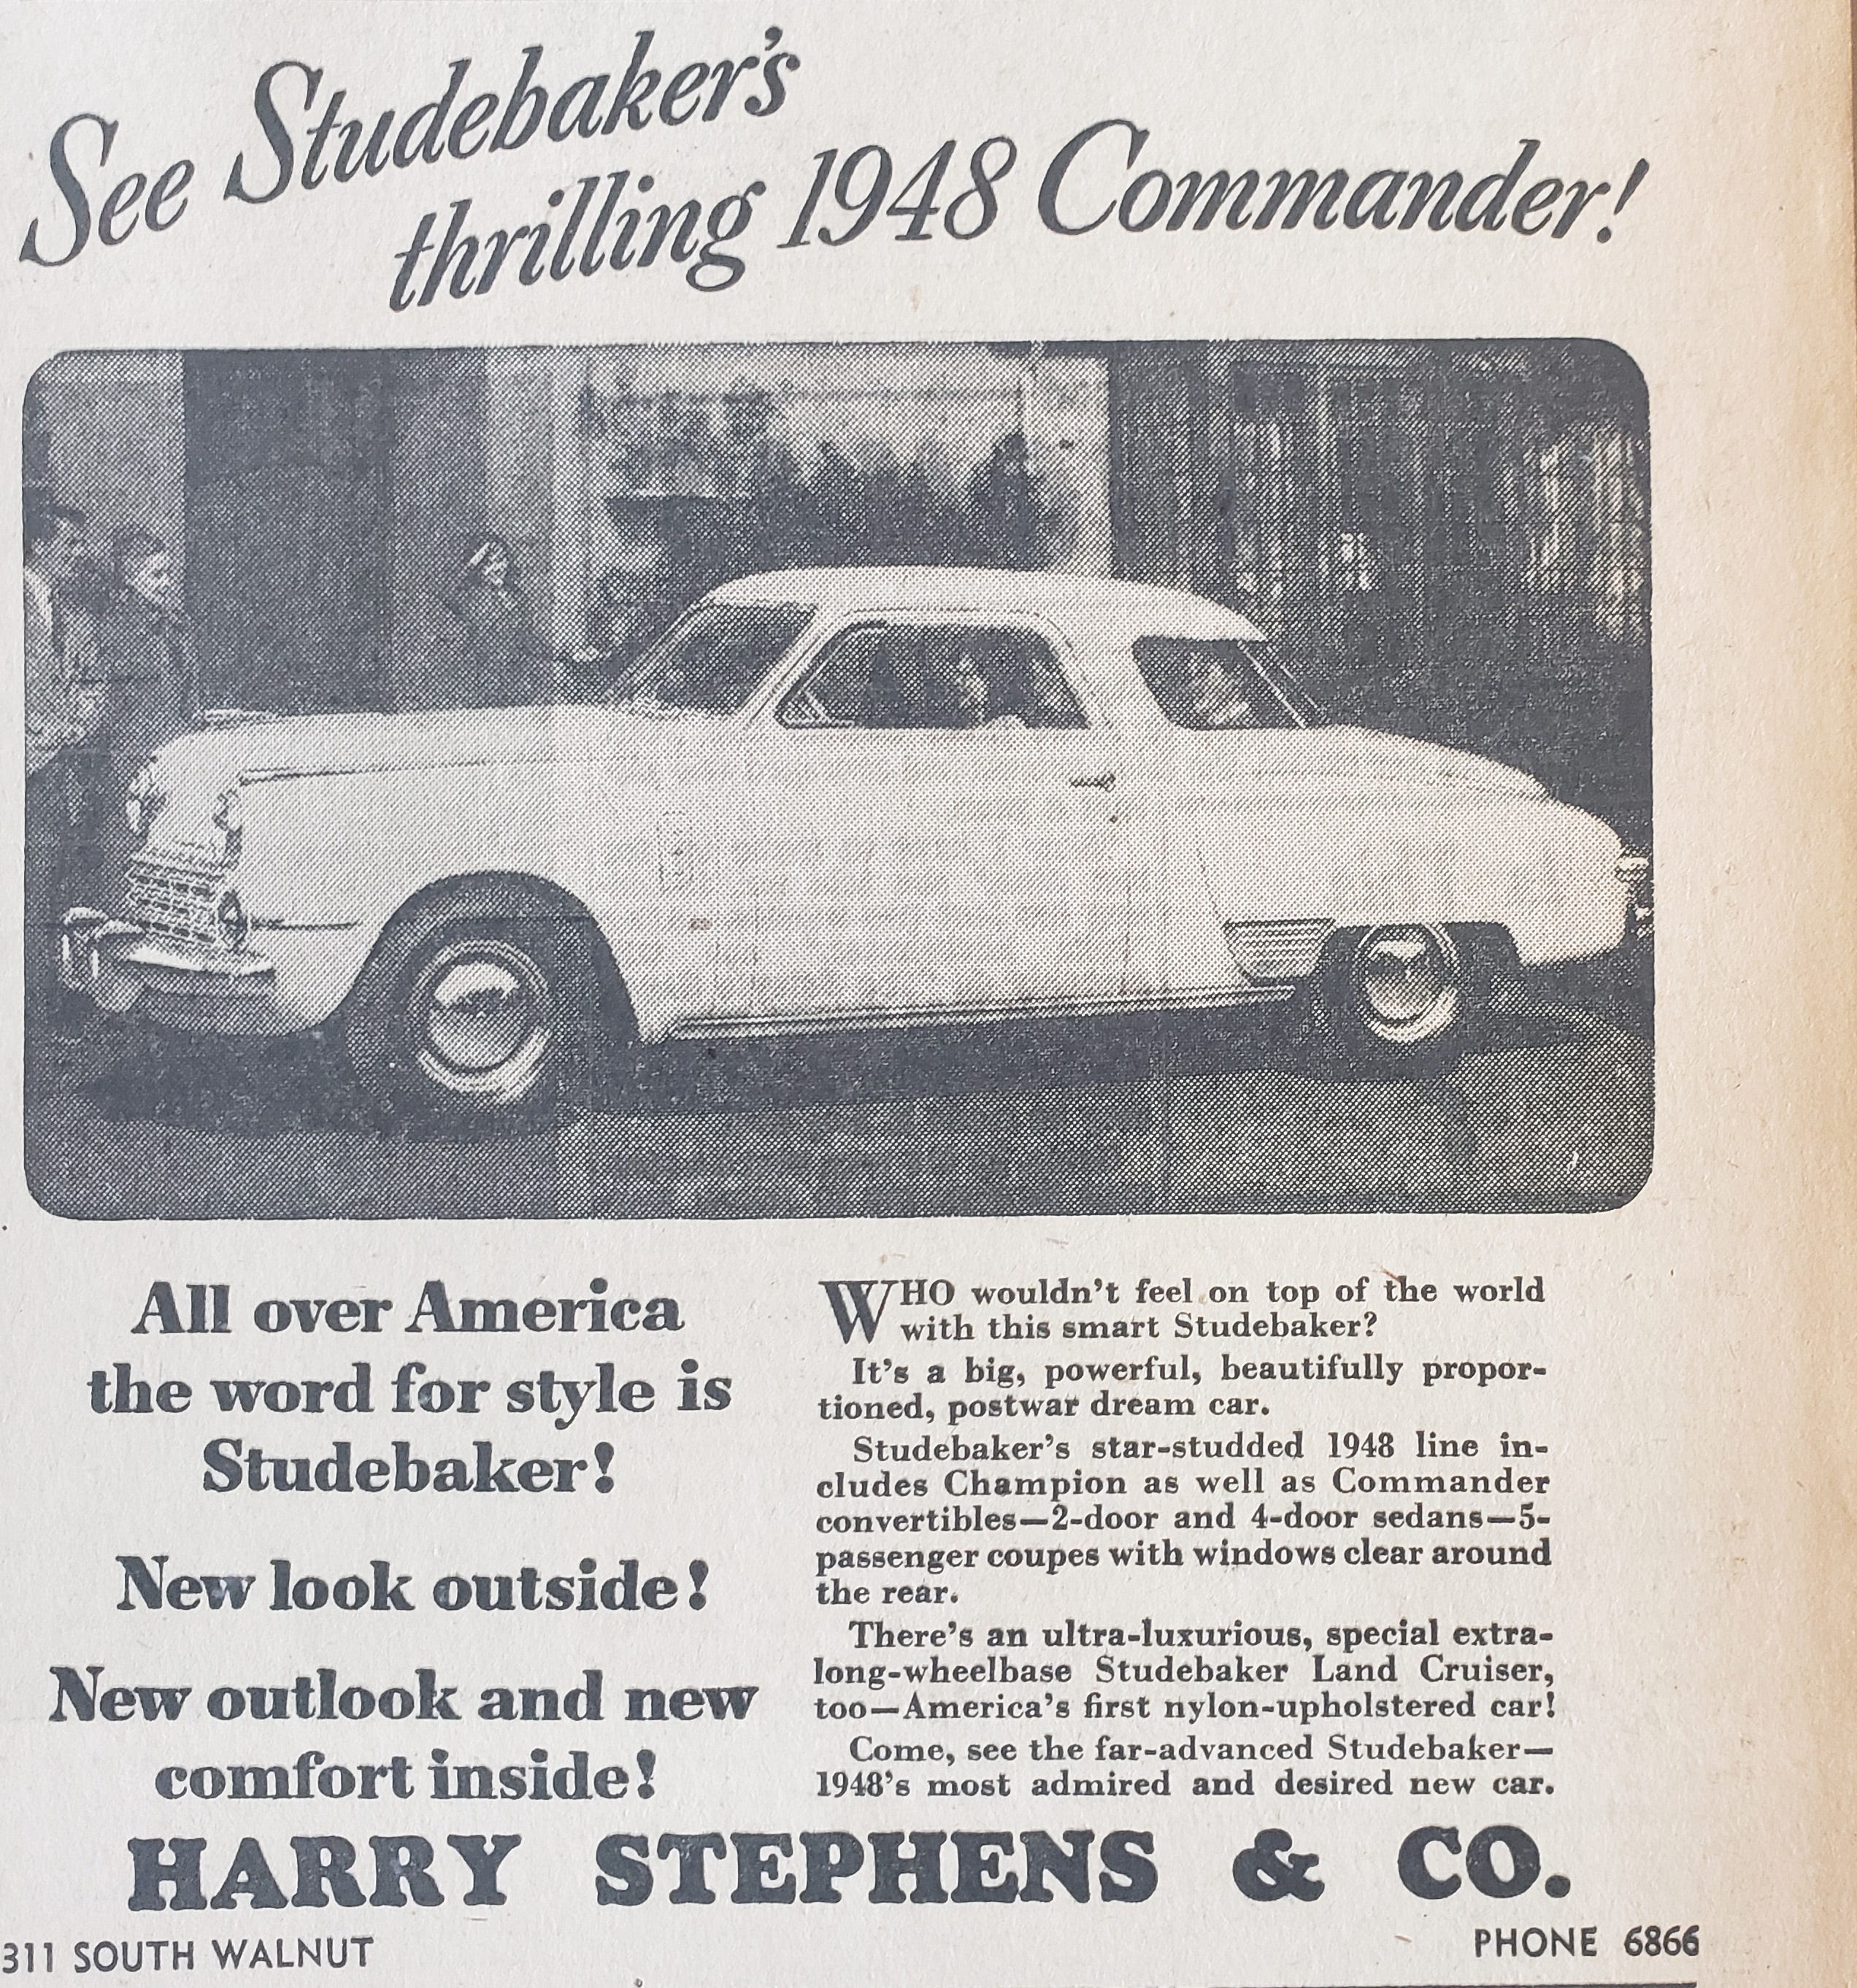 My Favorite Ride: A pea-green 1951 Studebaker offered friends a taste of freedom